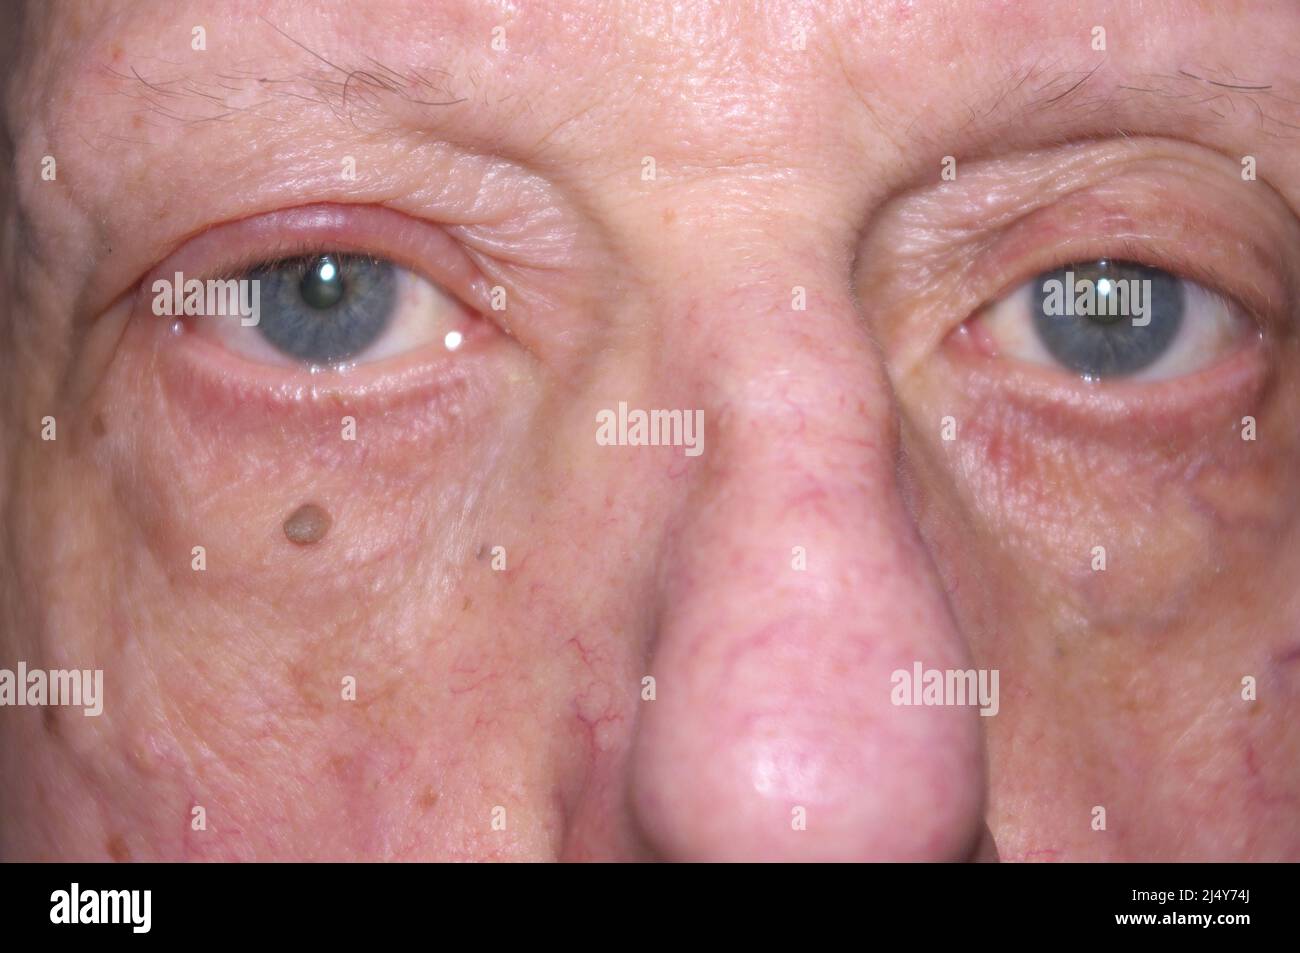 close up of eye with conjunctivitis Stock Photo